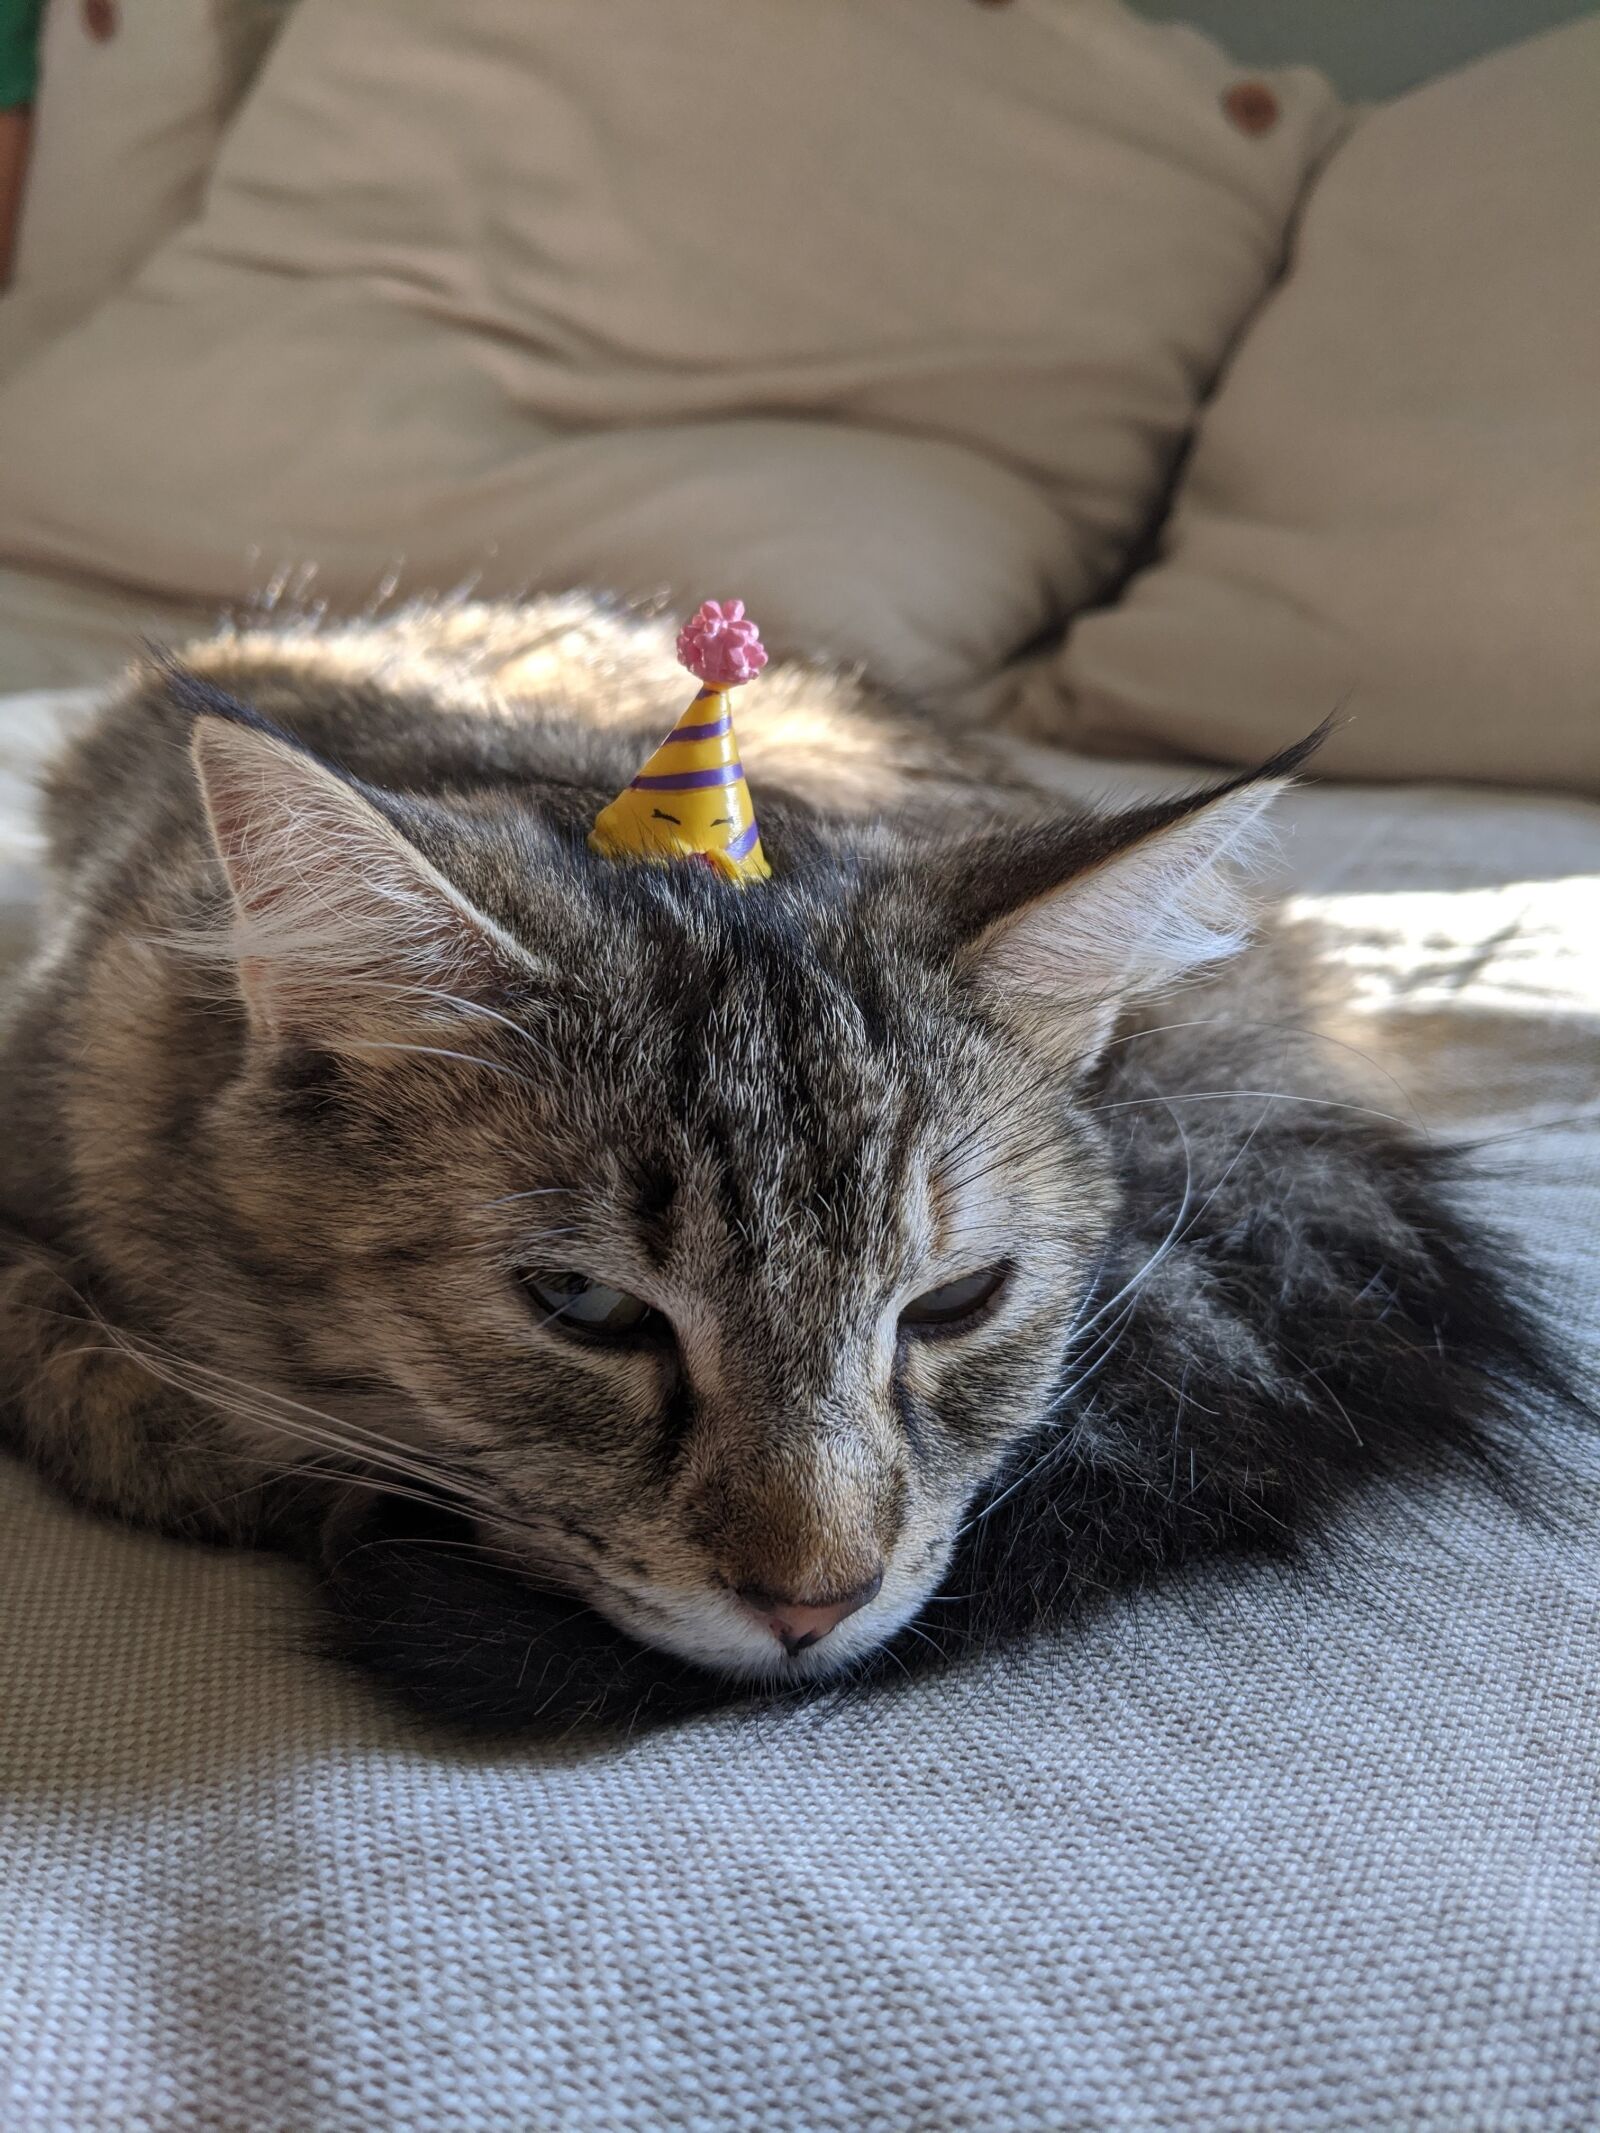 Google Pixel 3a sample photo. Cat, party hat, unamused photography